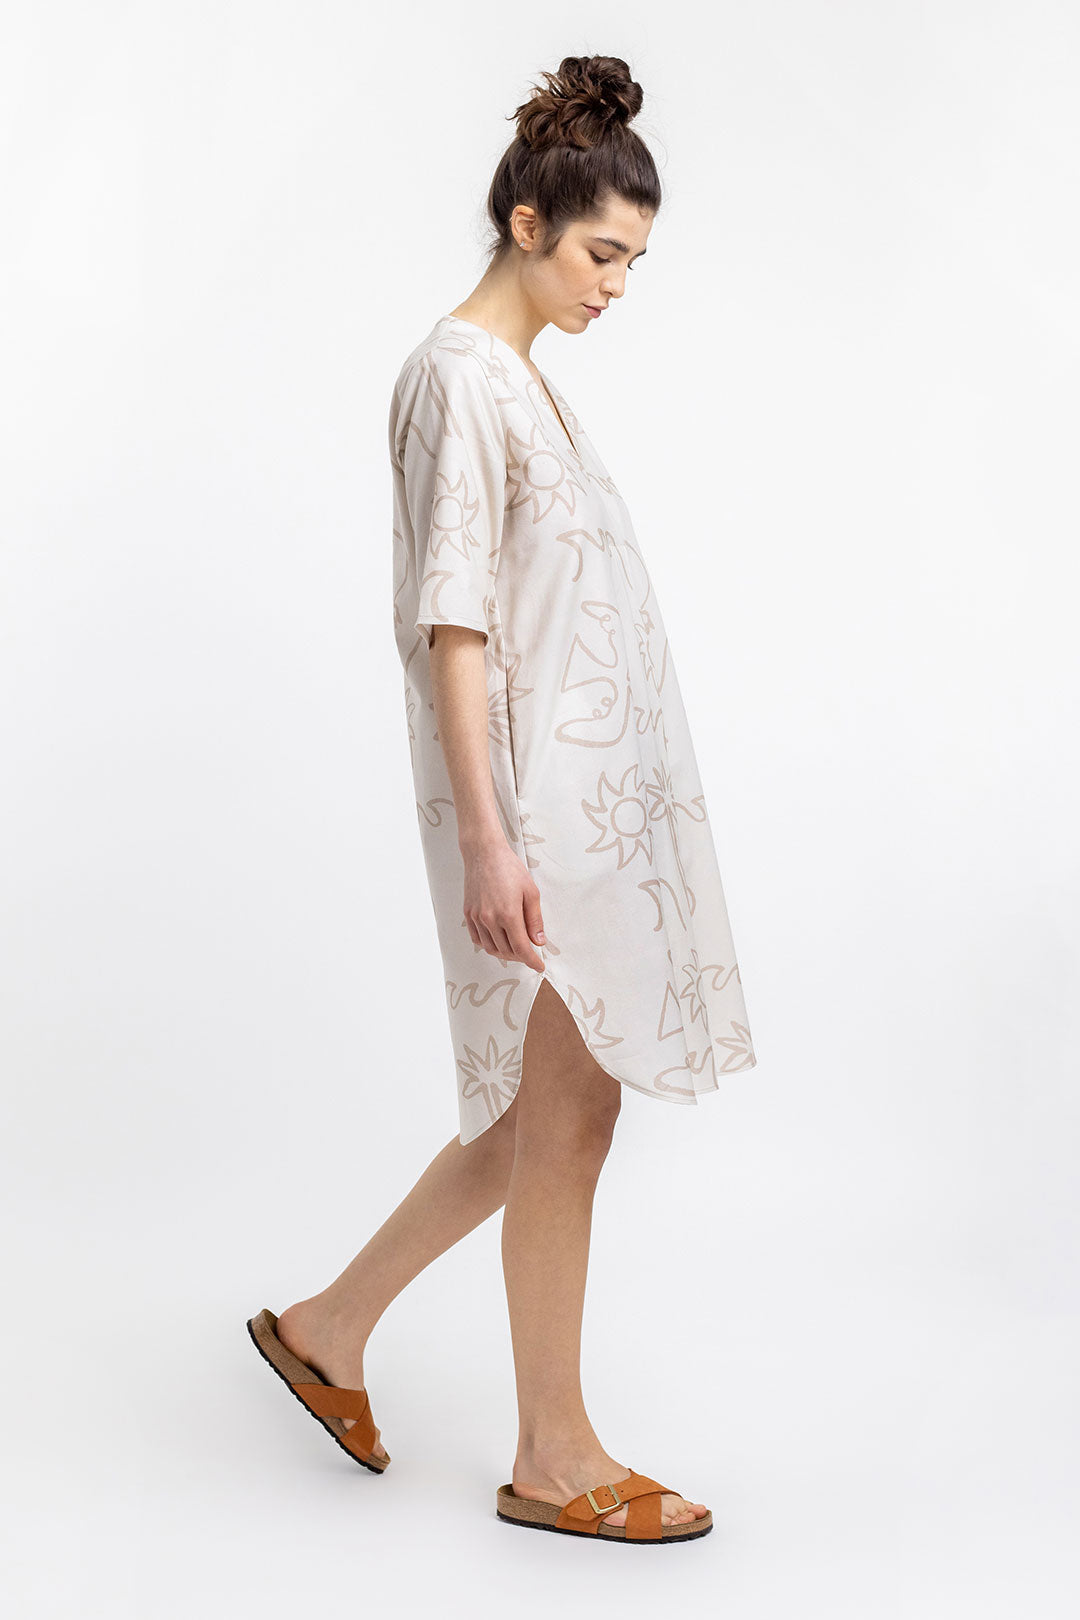 Beige Beachside dress made from 100% organic cotton from Rotholz